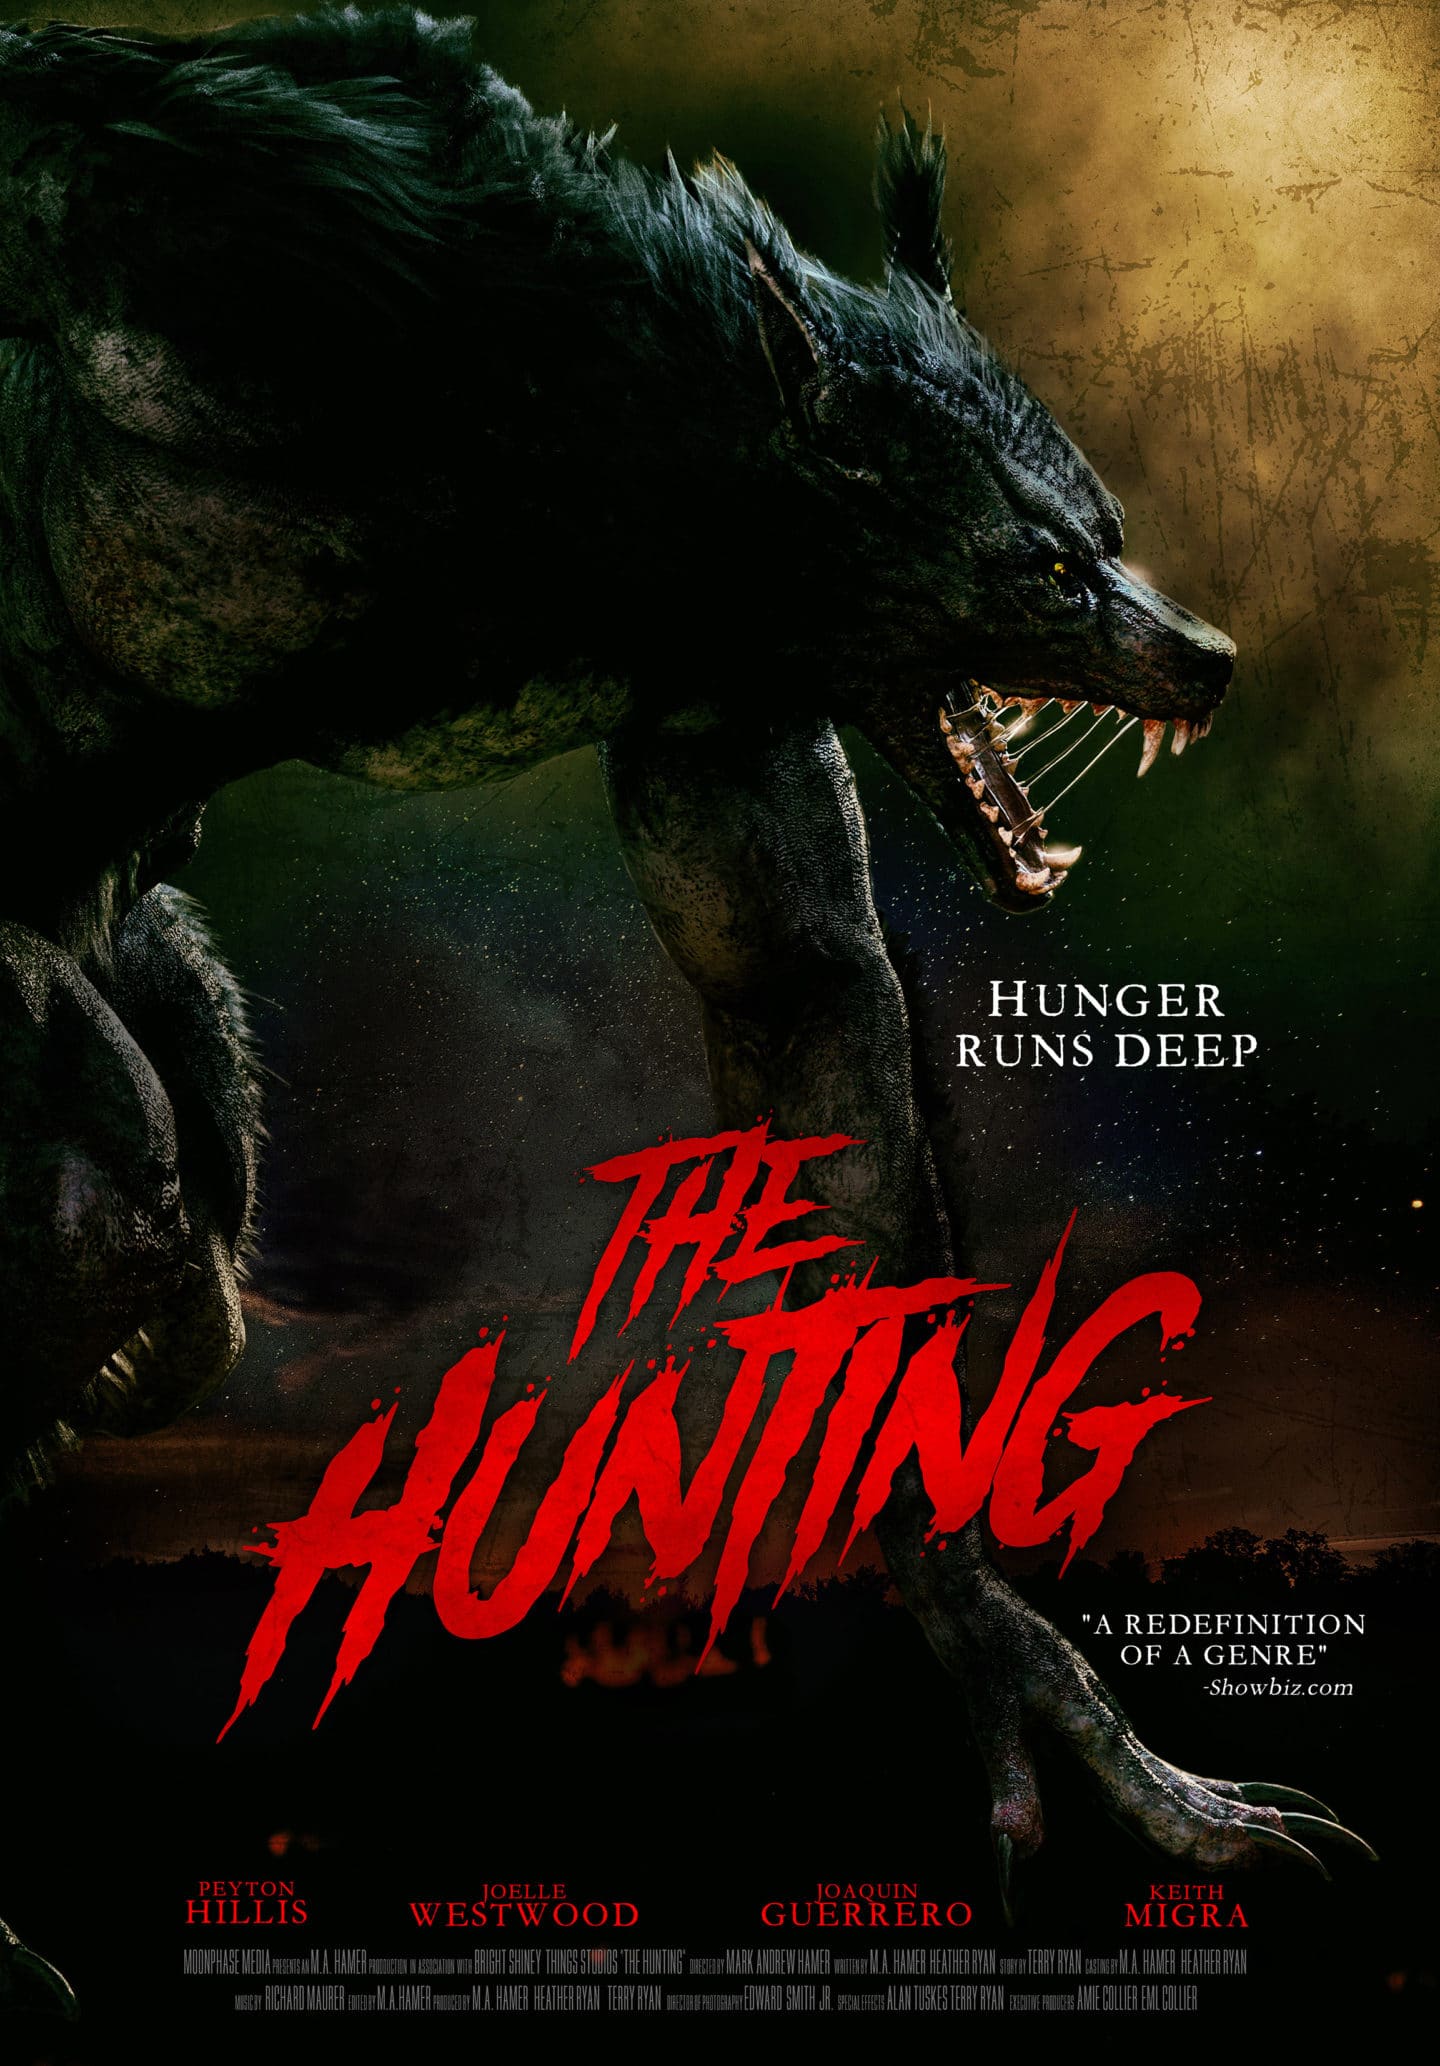 The Hunting - Teaser Poster